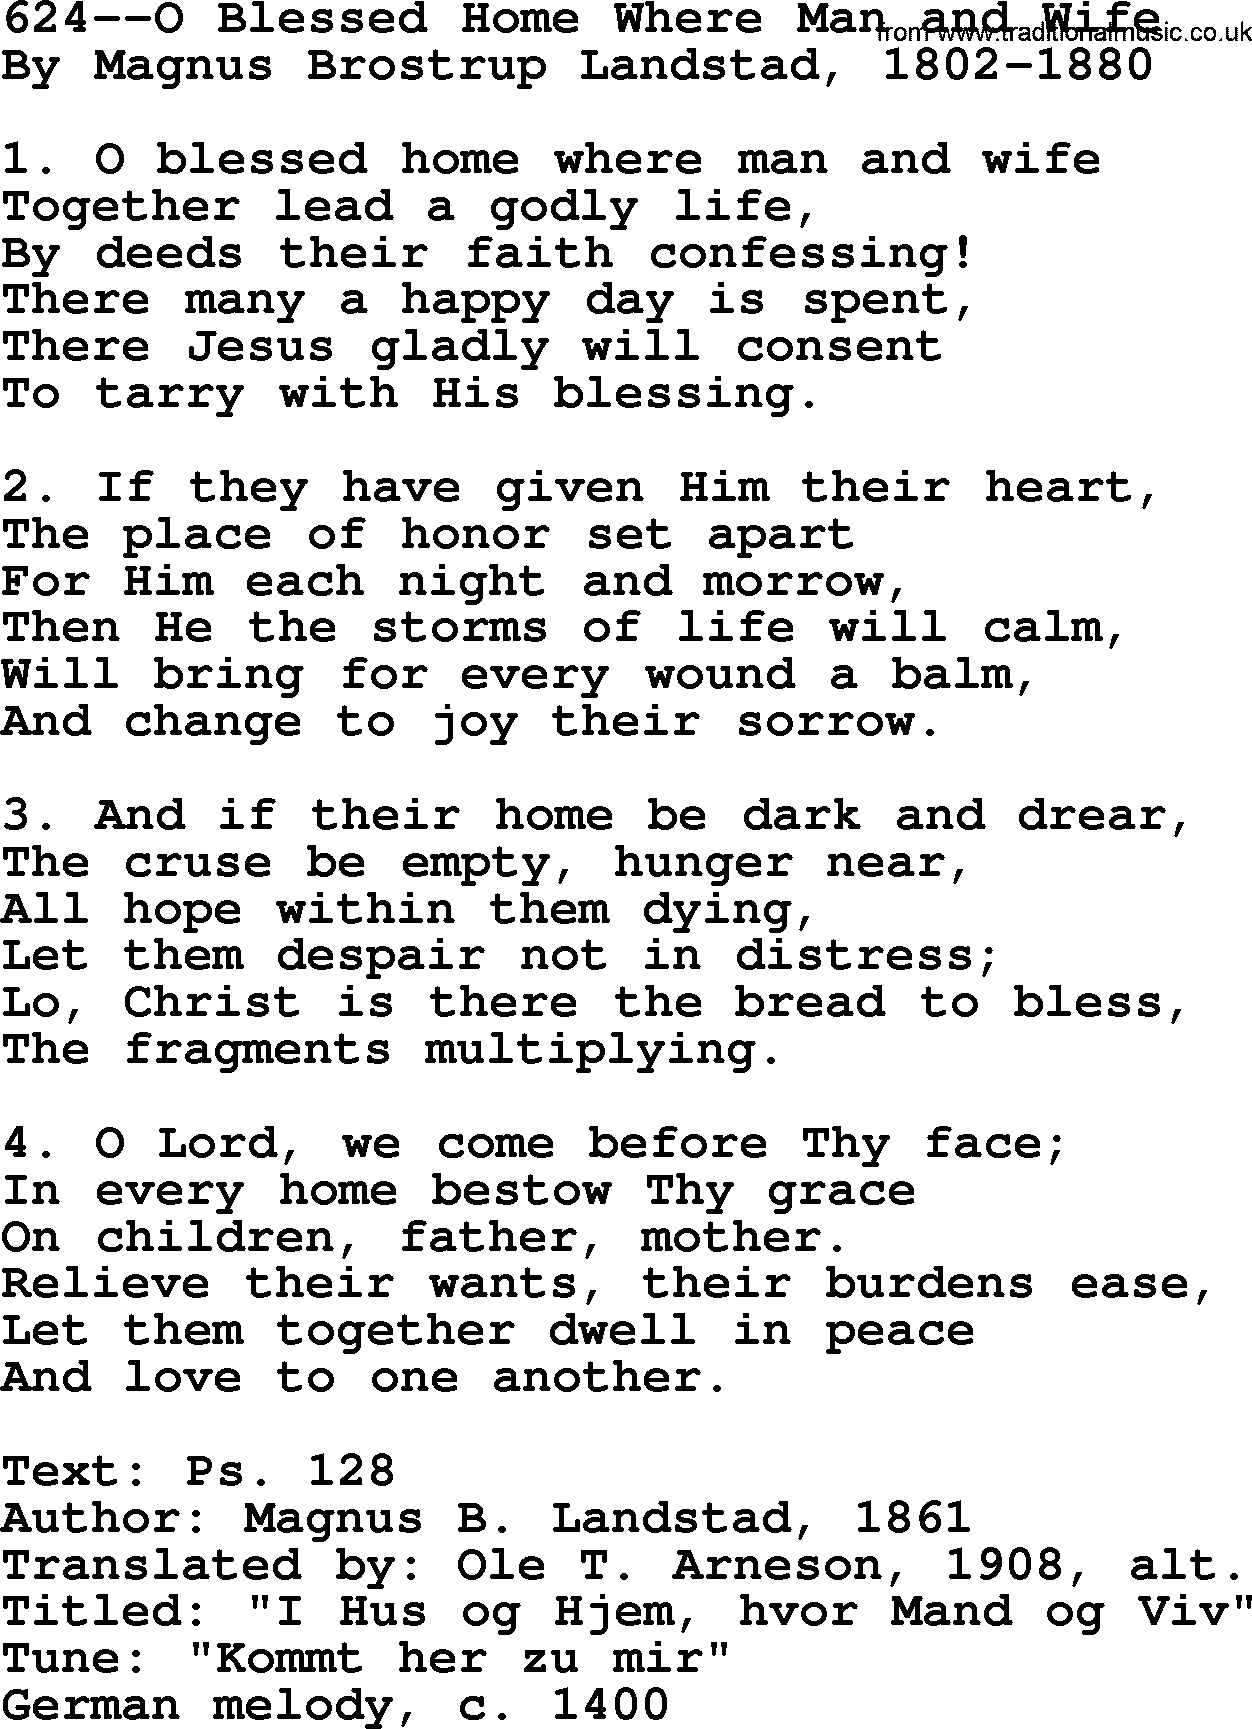 Lutheran Hymn: 624--O Blessed Home Where Man and Wife.txt lyrics with PDF